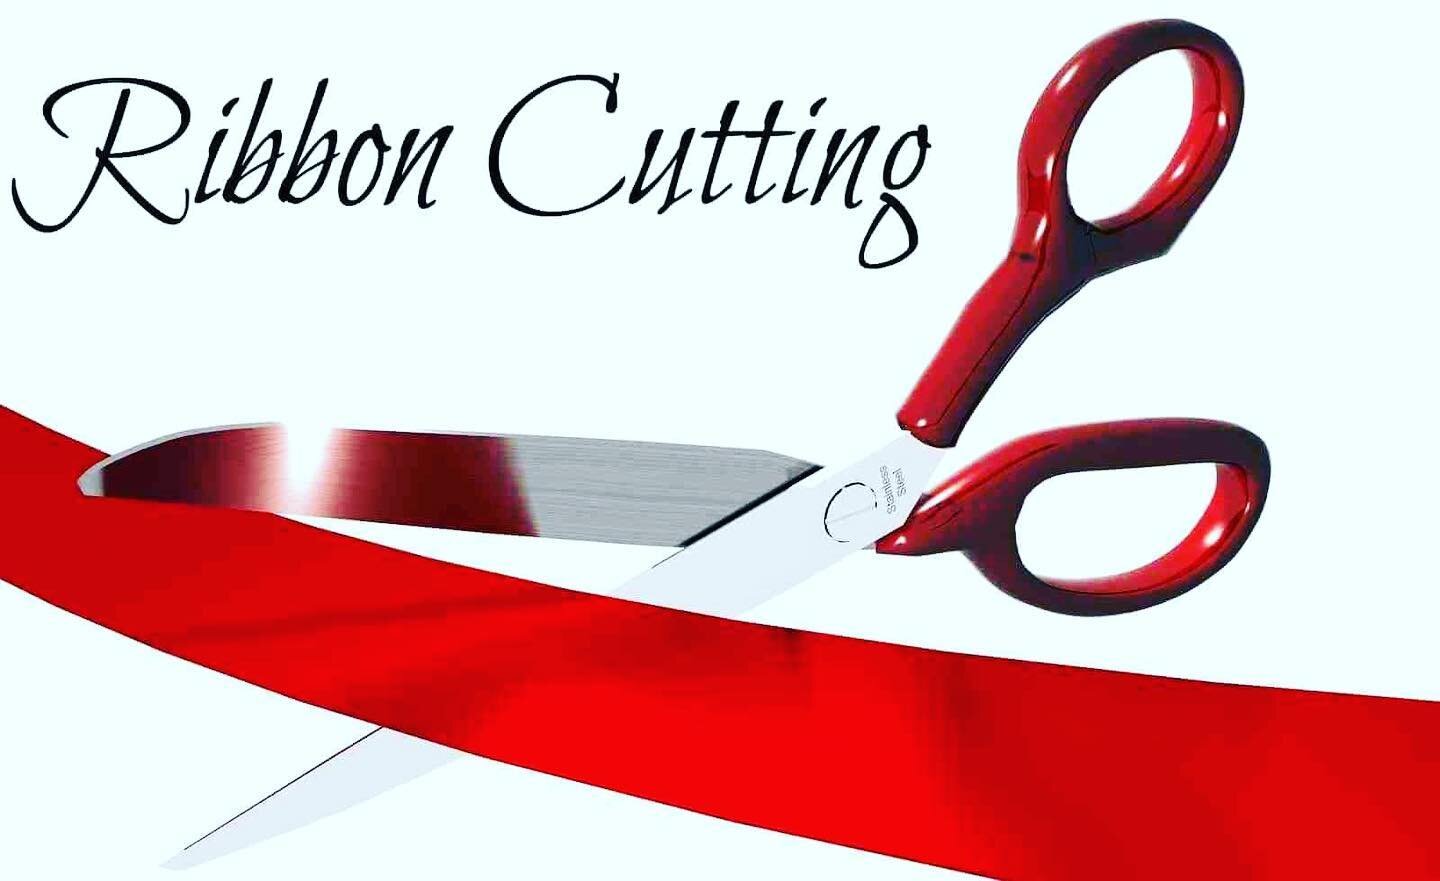 Join us Tomorrow Friday April 14th when the Chamber of Rancho Mirage honors TAP IT CYCLE with our ribbon cutting ceremony. Ceremony starts promptly @ 4pm. Hope to see you there. #cycle #ribboncuttingceremony #spin #spinning #spinlife #spinner #fitnes